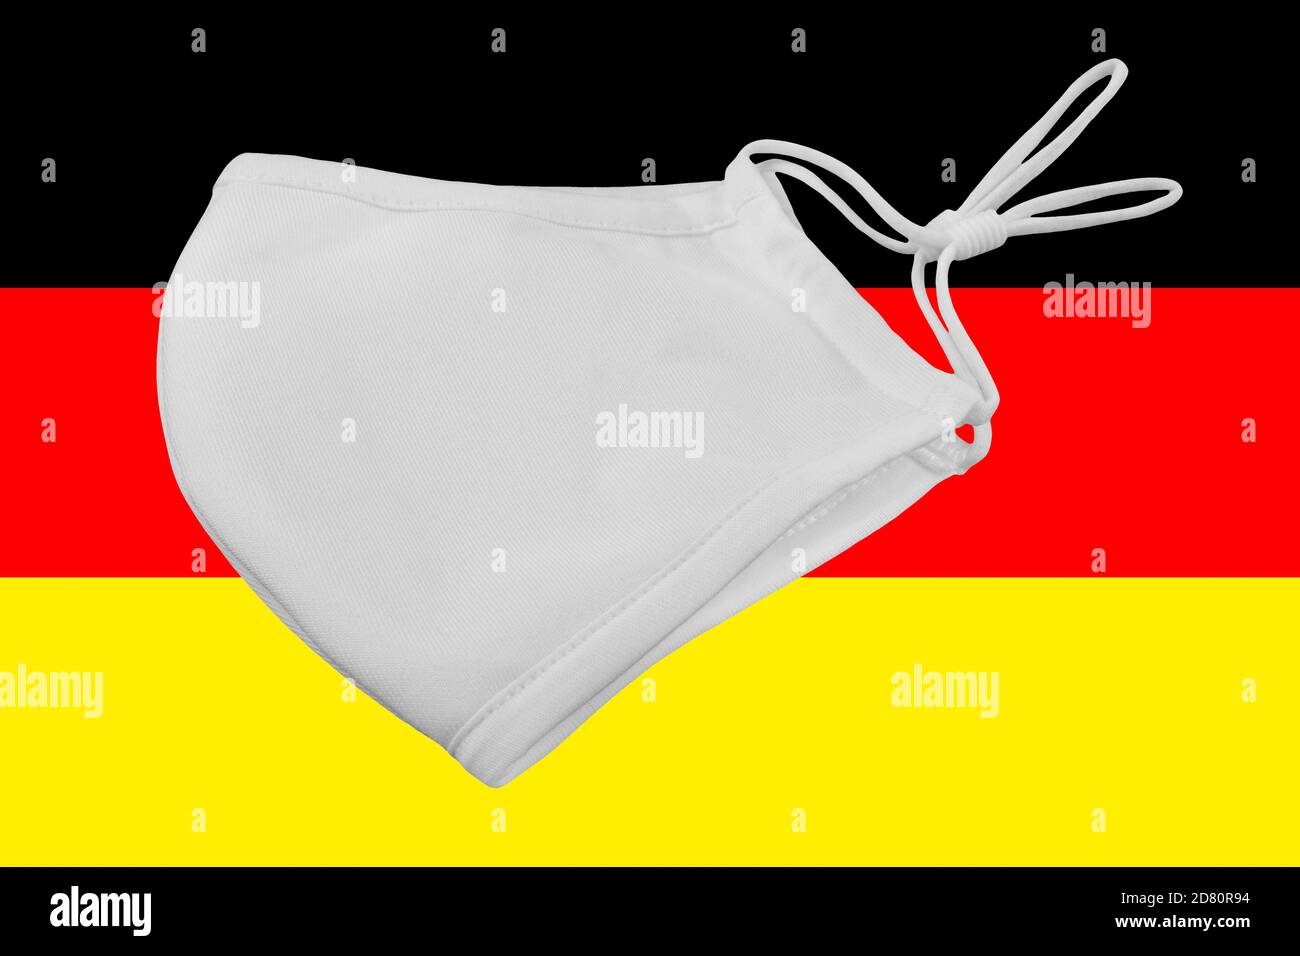 Protective Face Mask KN 95 and German Flag Background Stock Photo